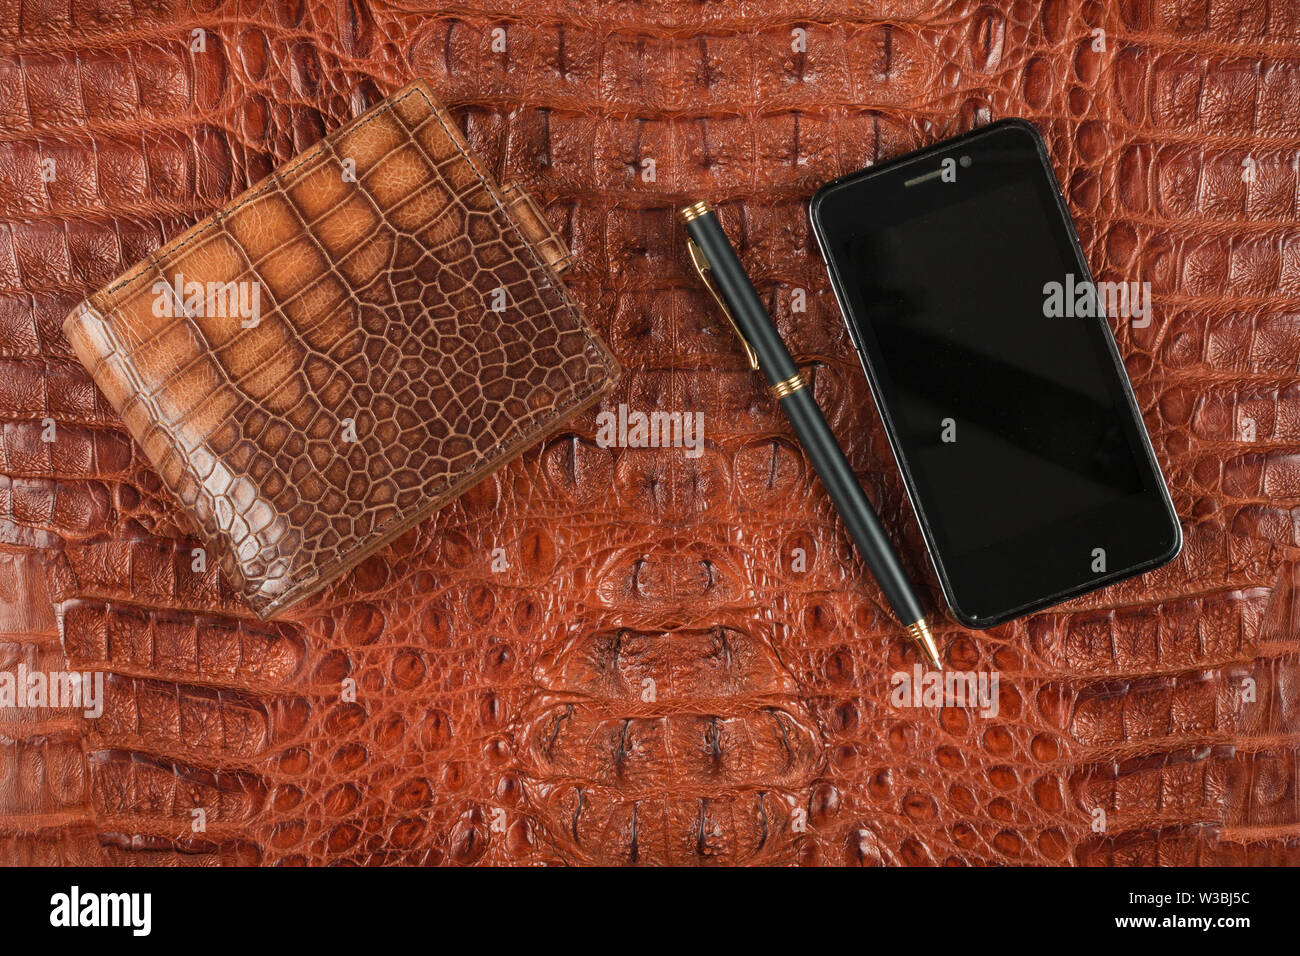 Men's wallet, phone and pen lies on genuine crocodile leather. View from above. Stock Photo